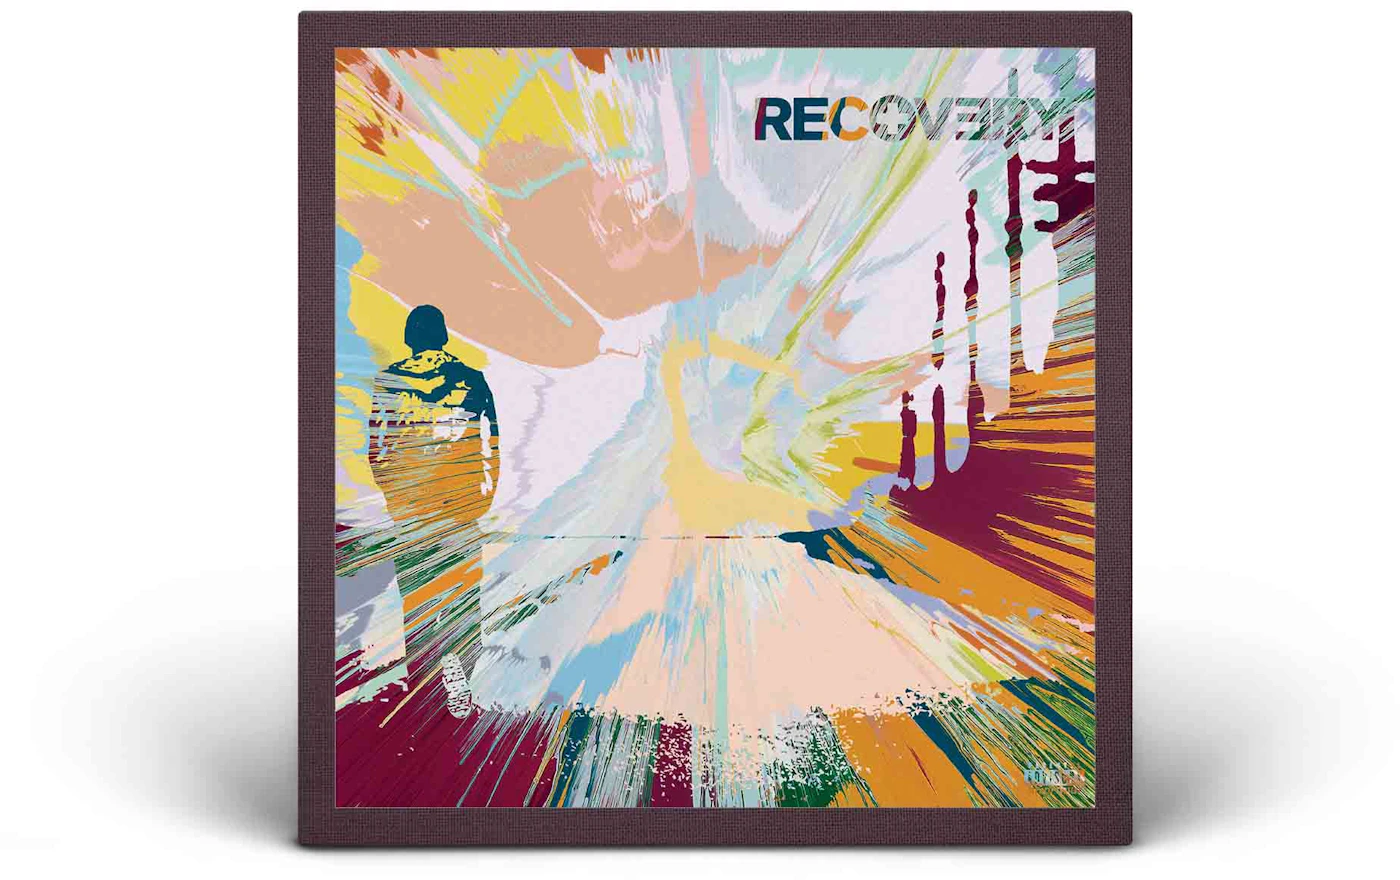 https://images.stockx.com/images/Interscope-Records-Eminem-Recovery-by-Damien-Hirst-Gallery-Vinyl-Record-Signed-Edition-of-100.jpg?fit=fill&bg=FFFFFF&w=700&h=500&fm=webp&auto=compress&q=90&dpr=2&trim=color&updated_at=1643267625